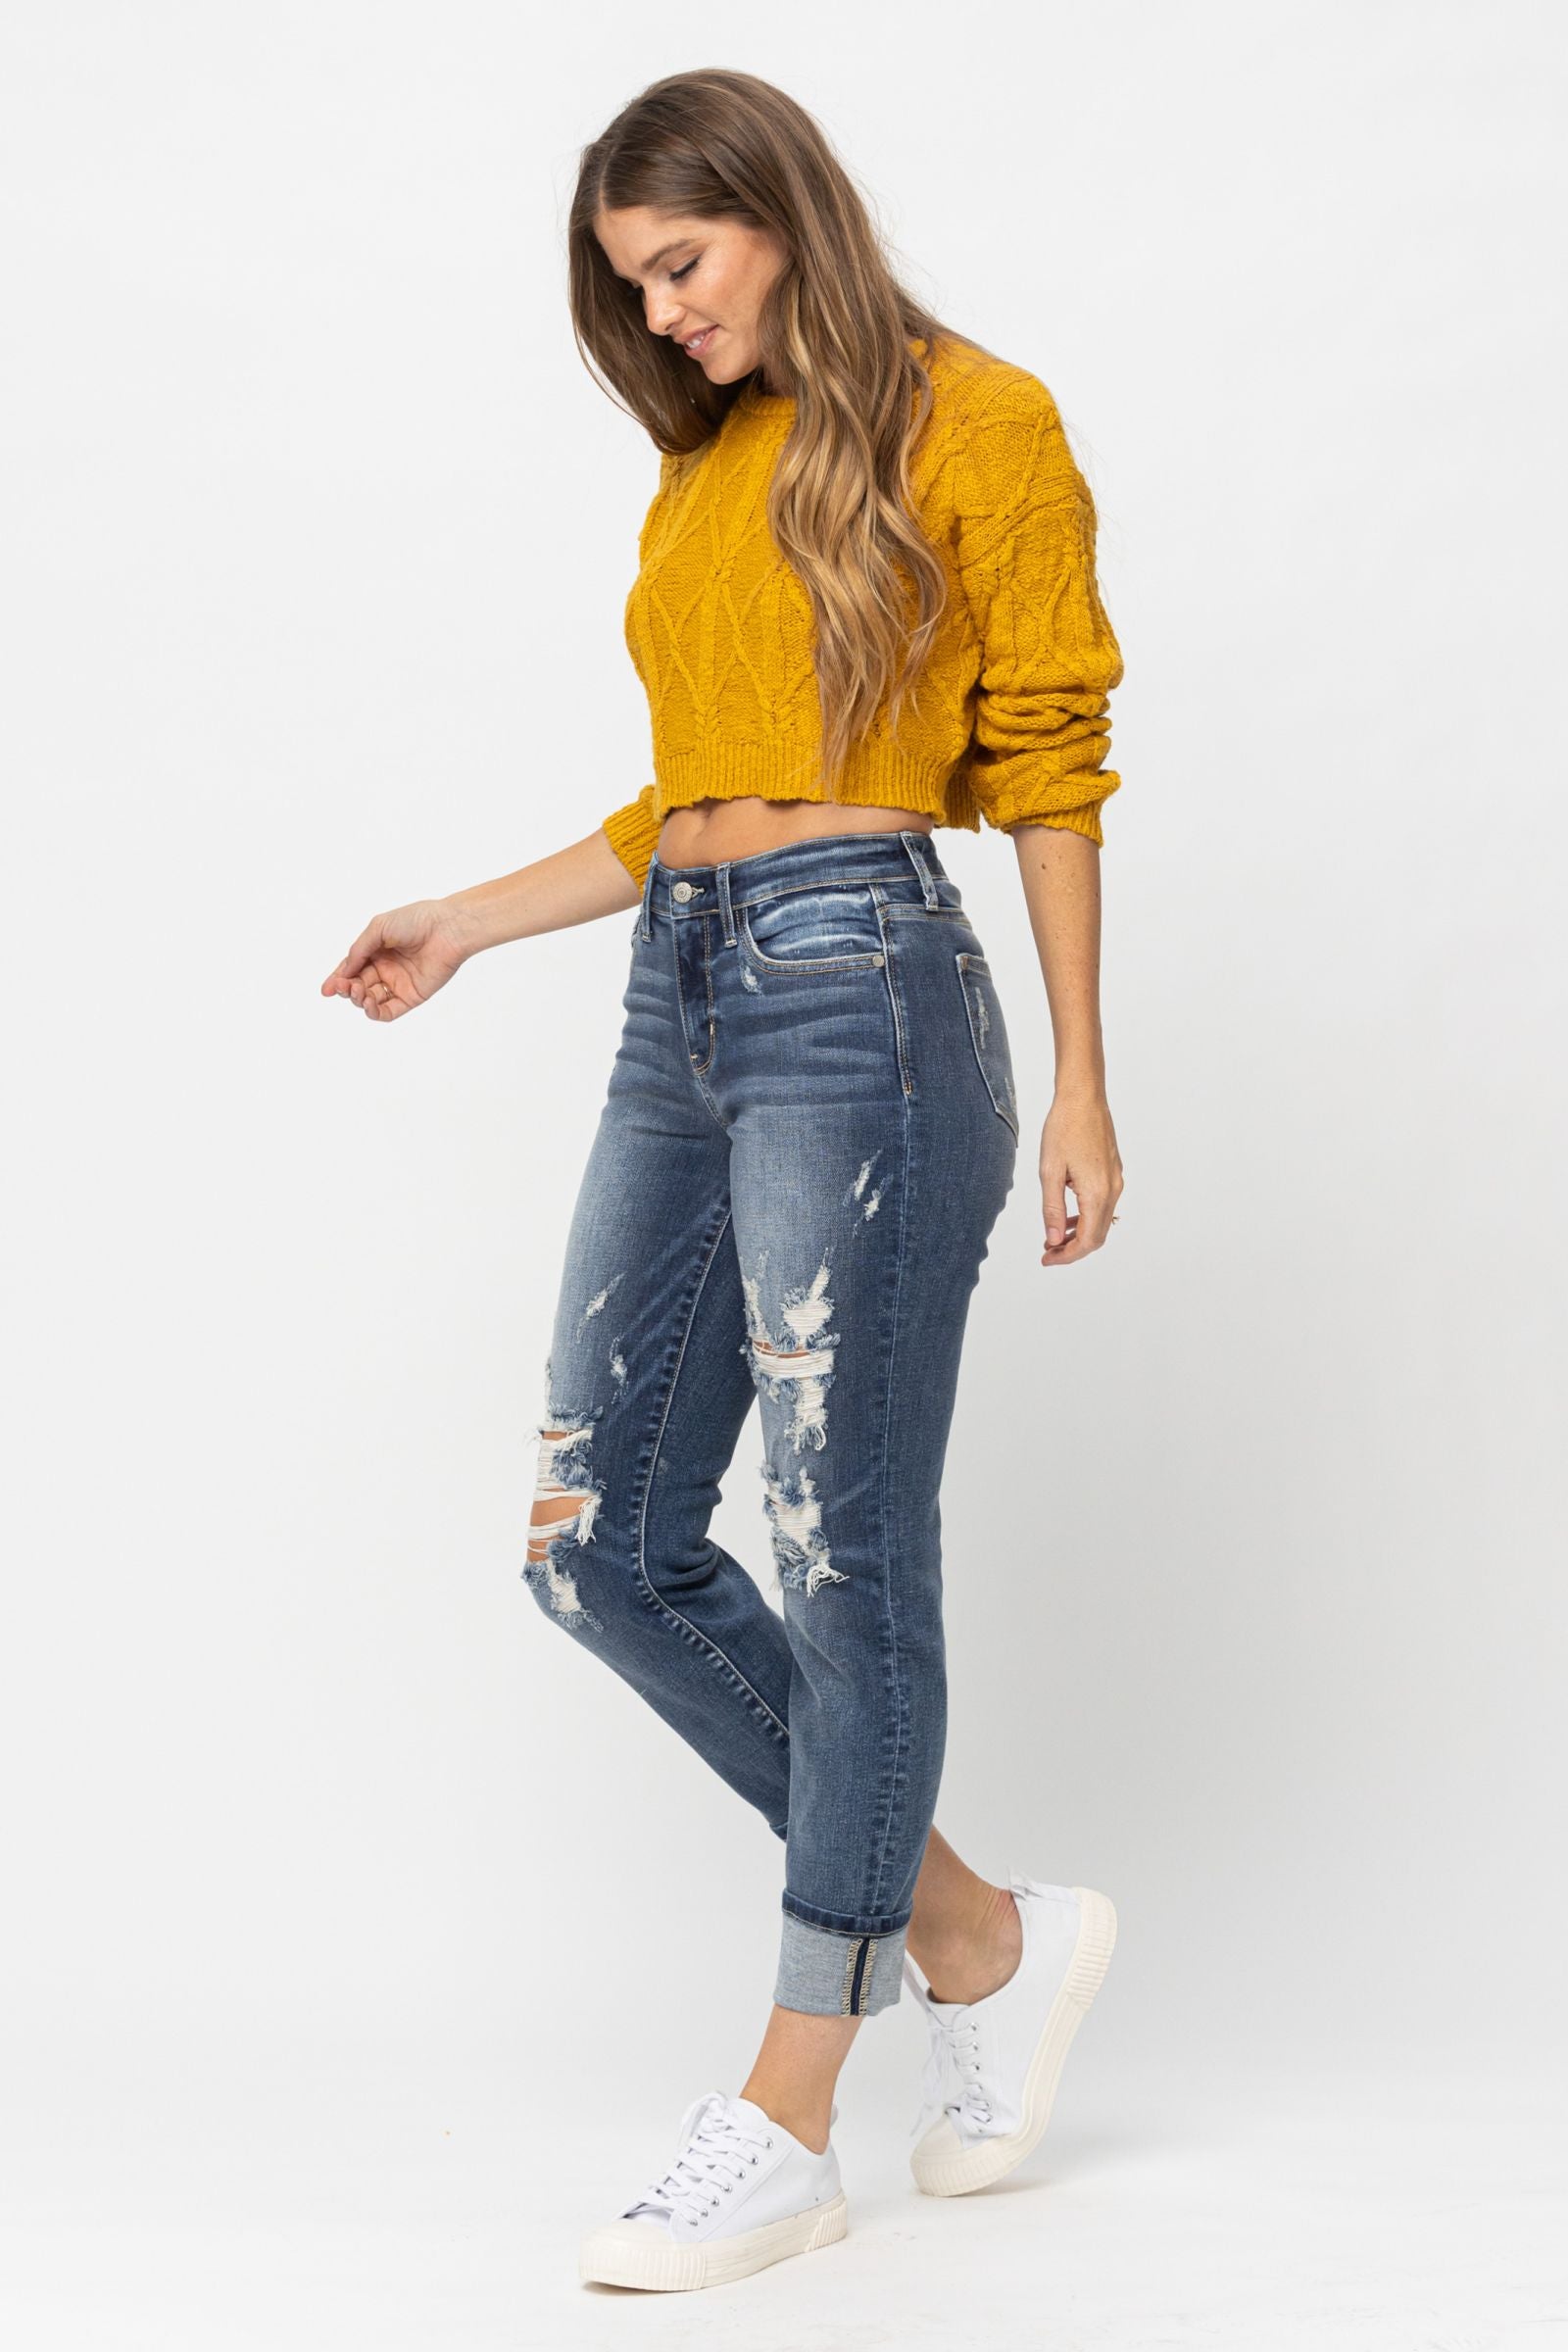 Judy Blue® LUCY Jeans